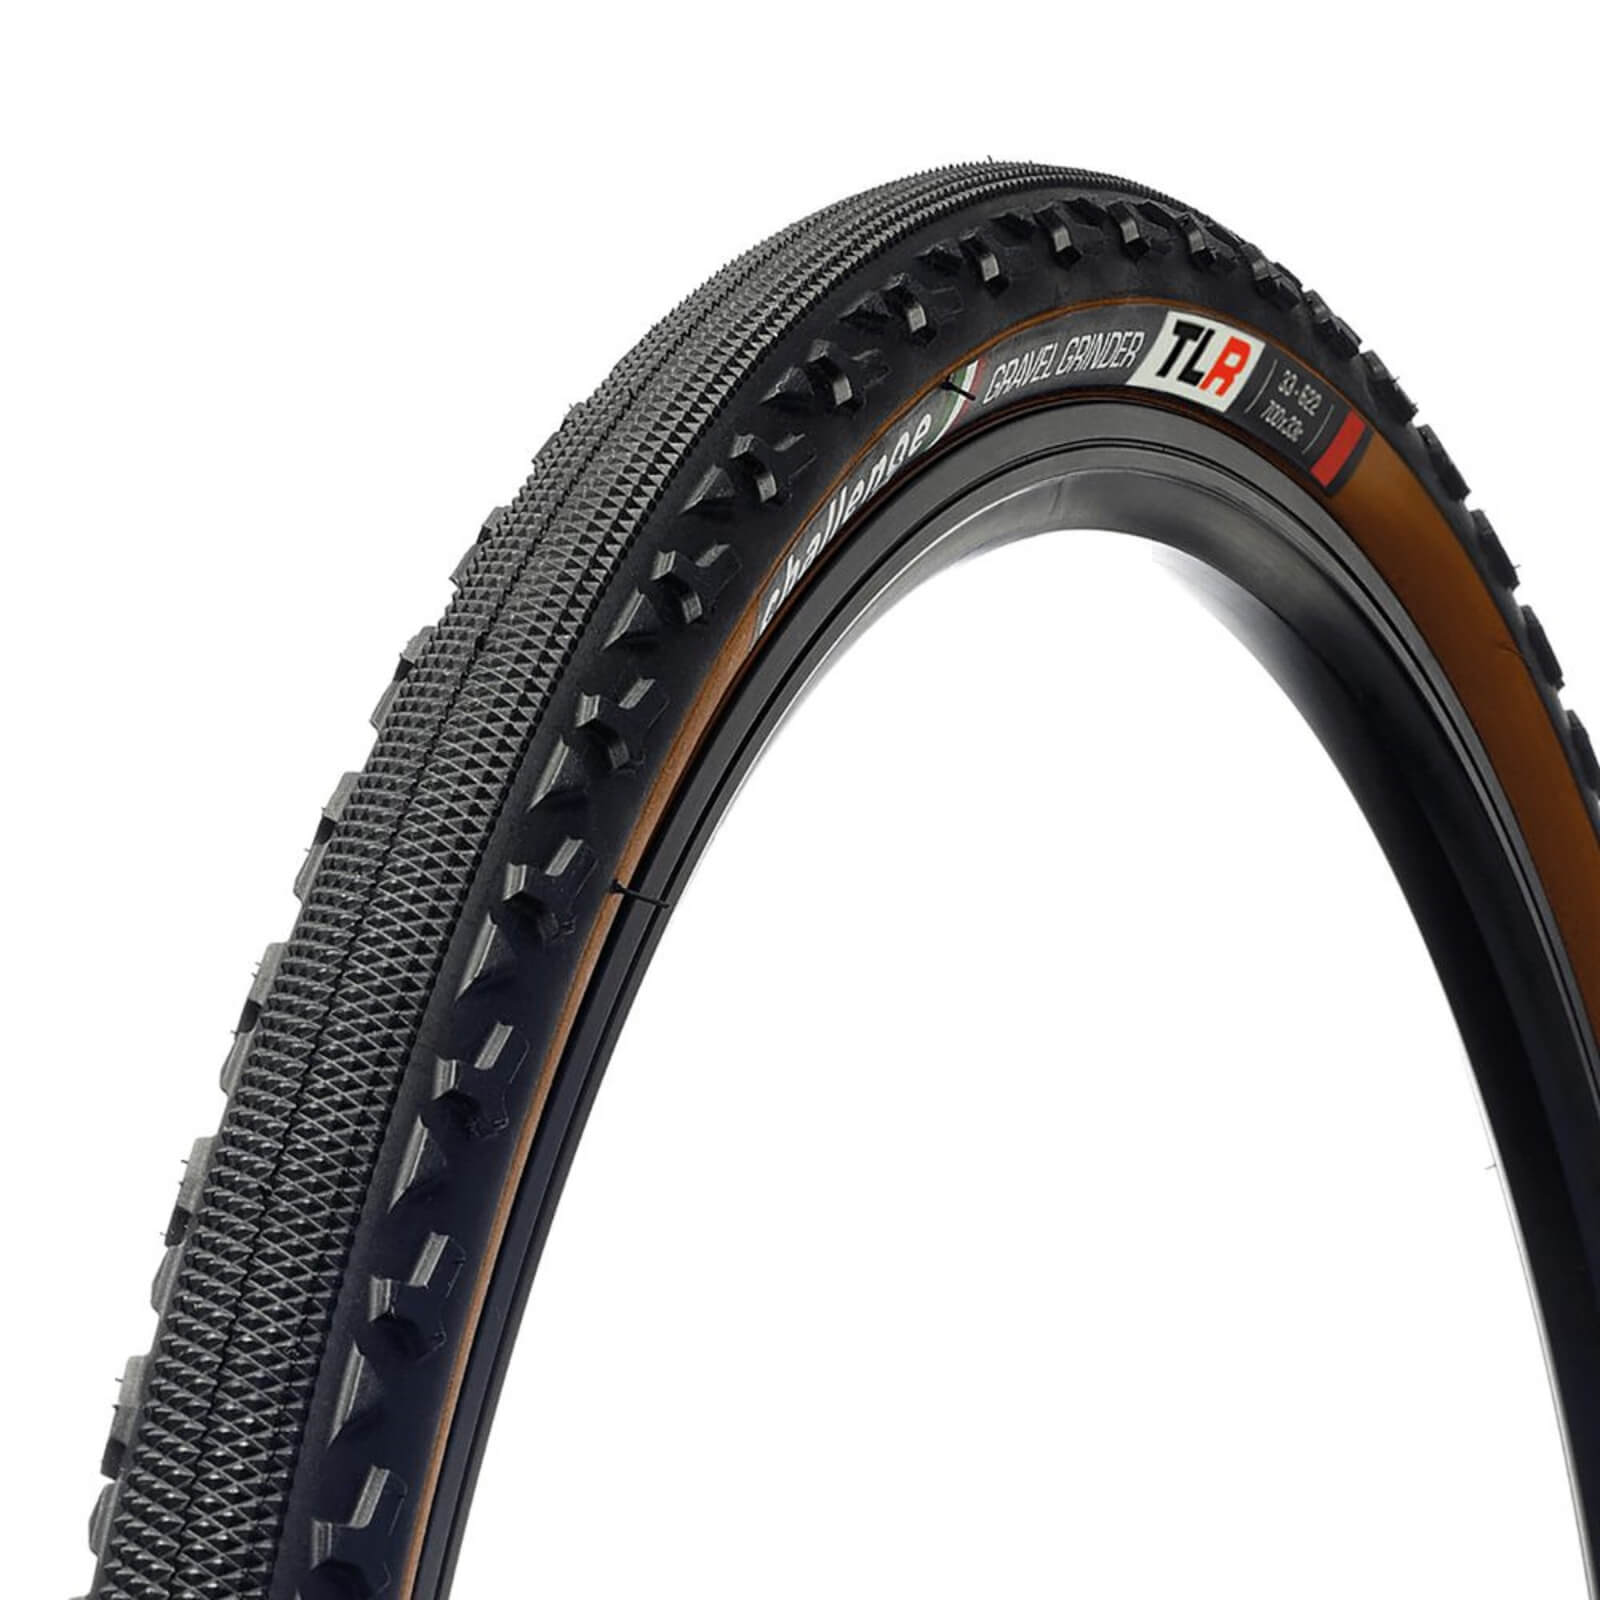 Challenge Gravel Grinder Tubeless Ready Clincher Tyre - 700 x 38c - Brown